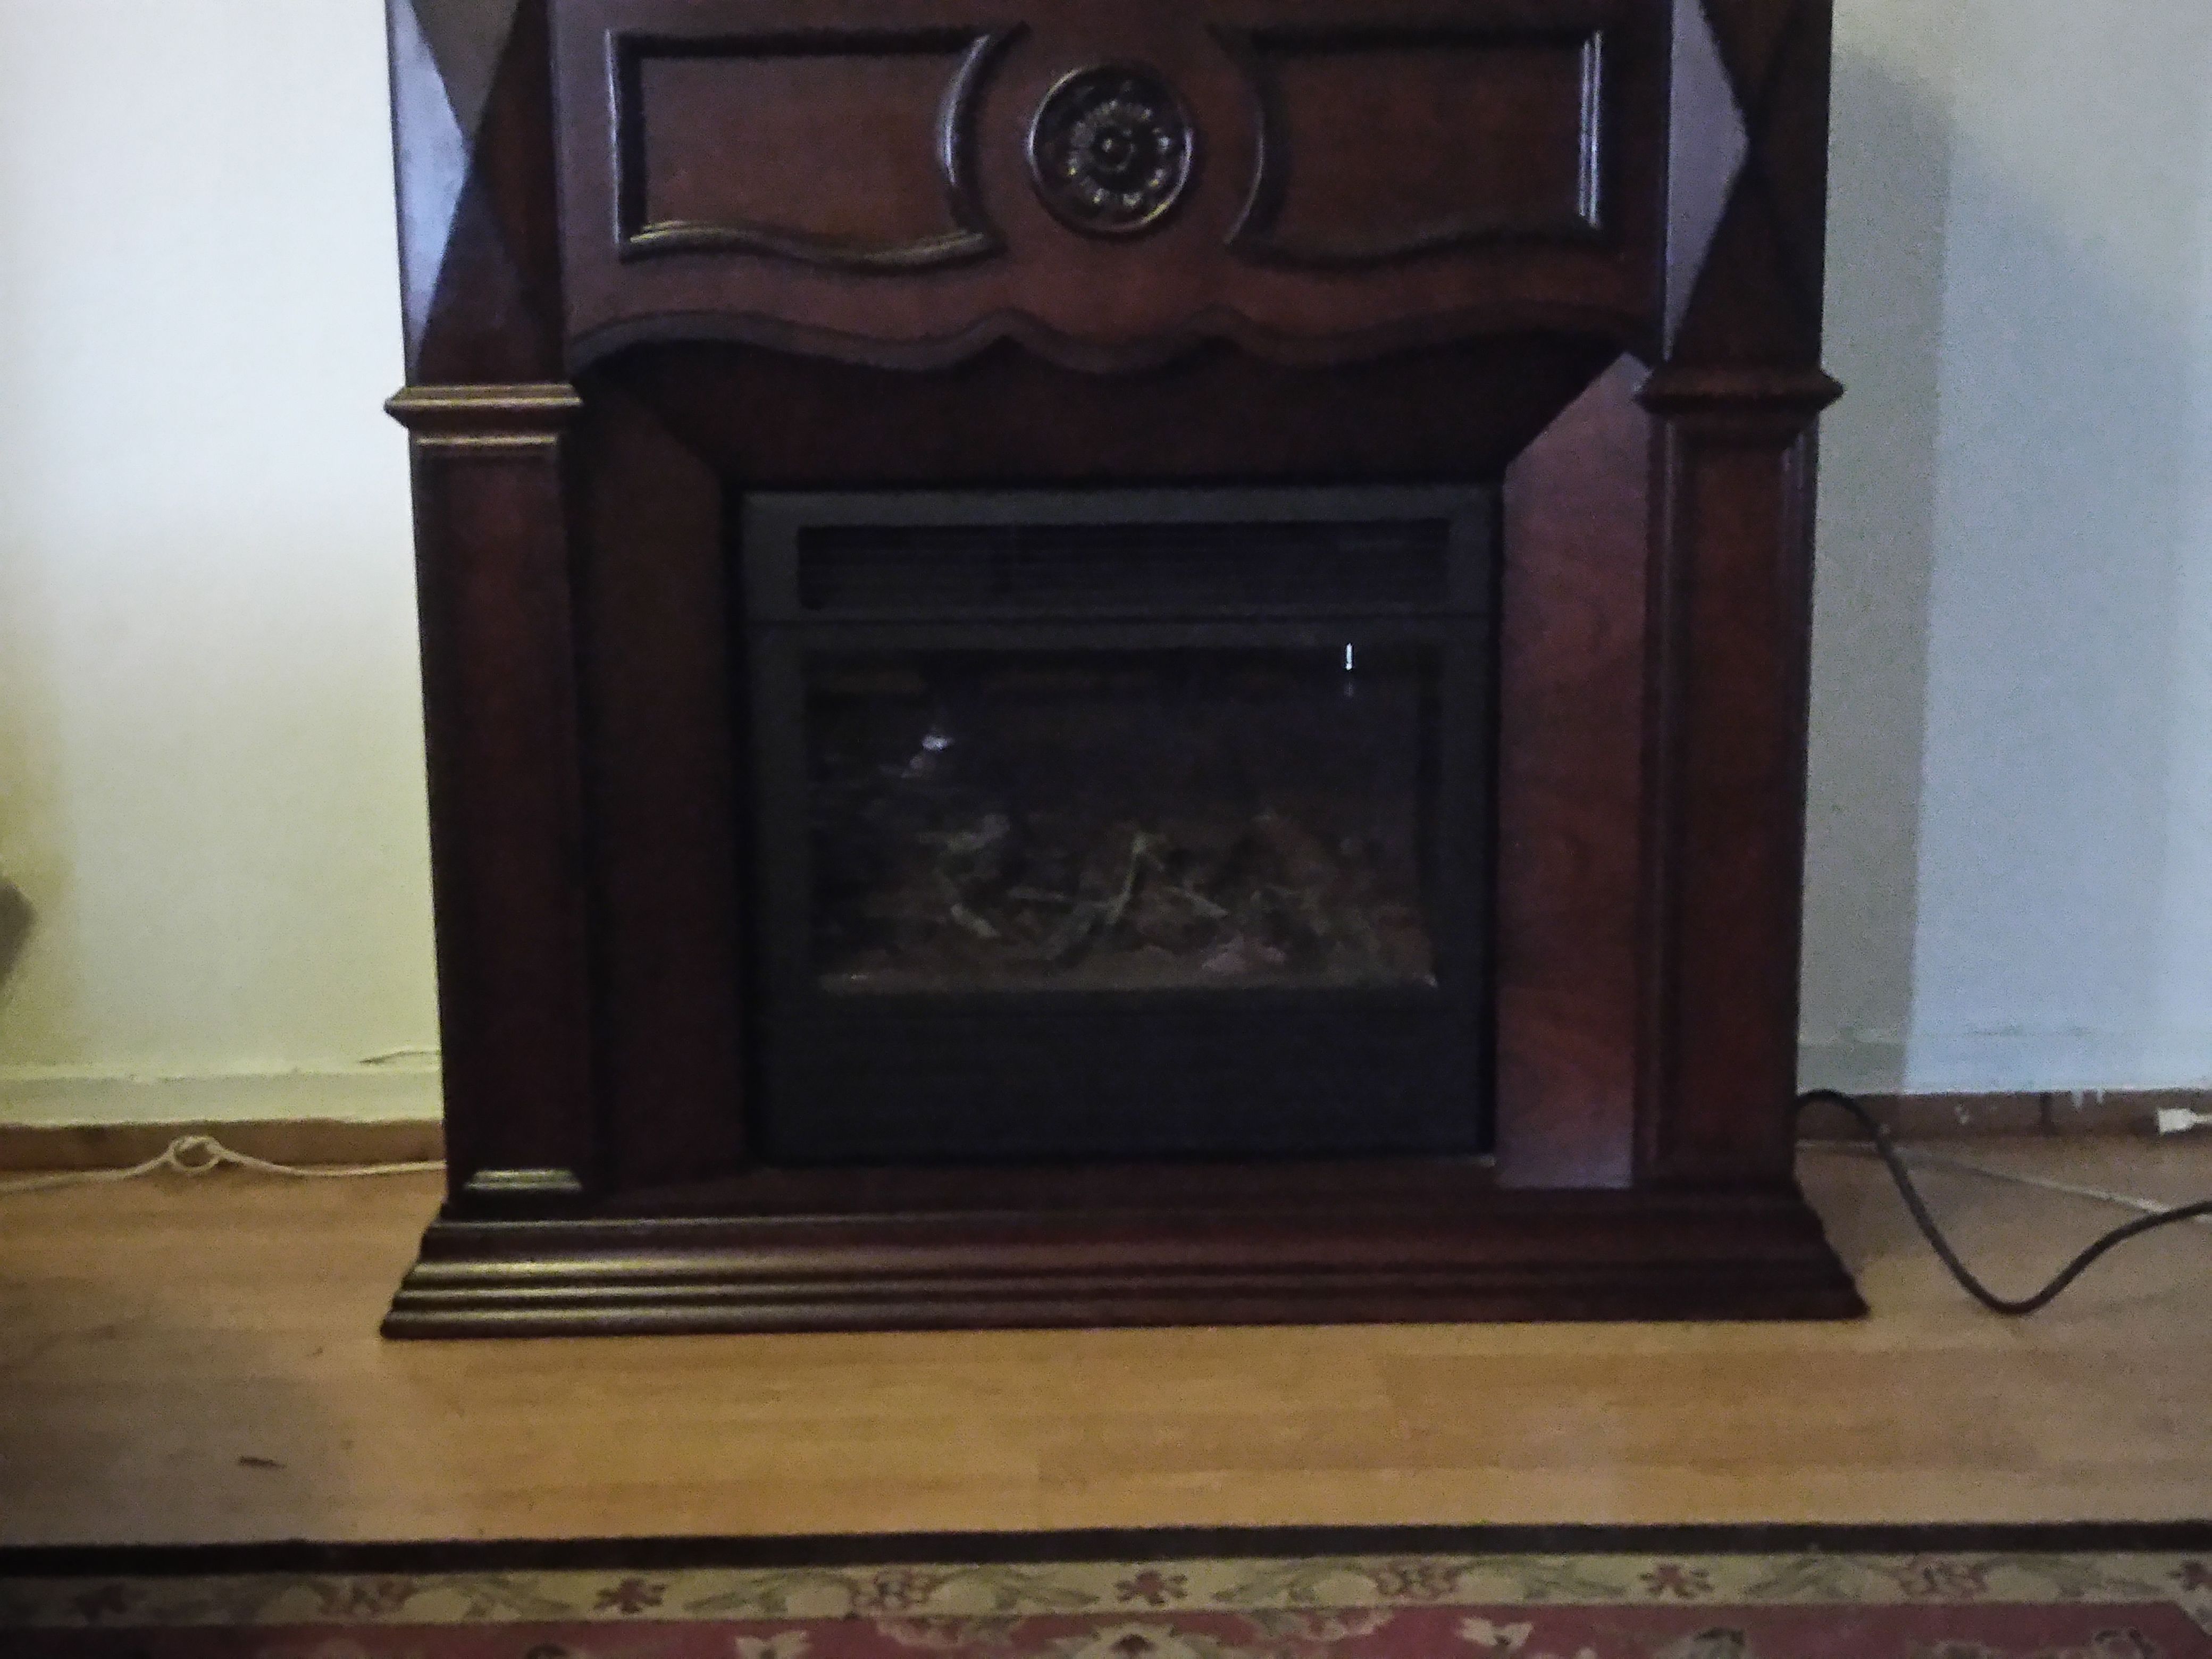 Heater electric TV stand/fireplace